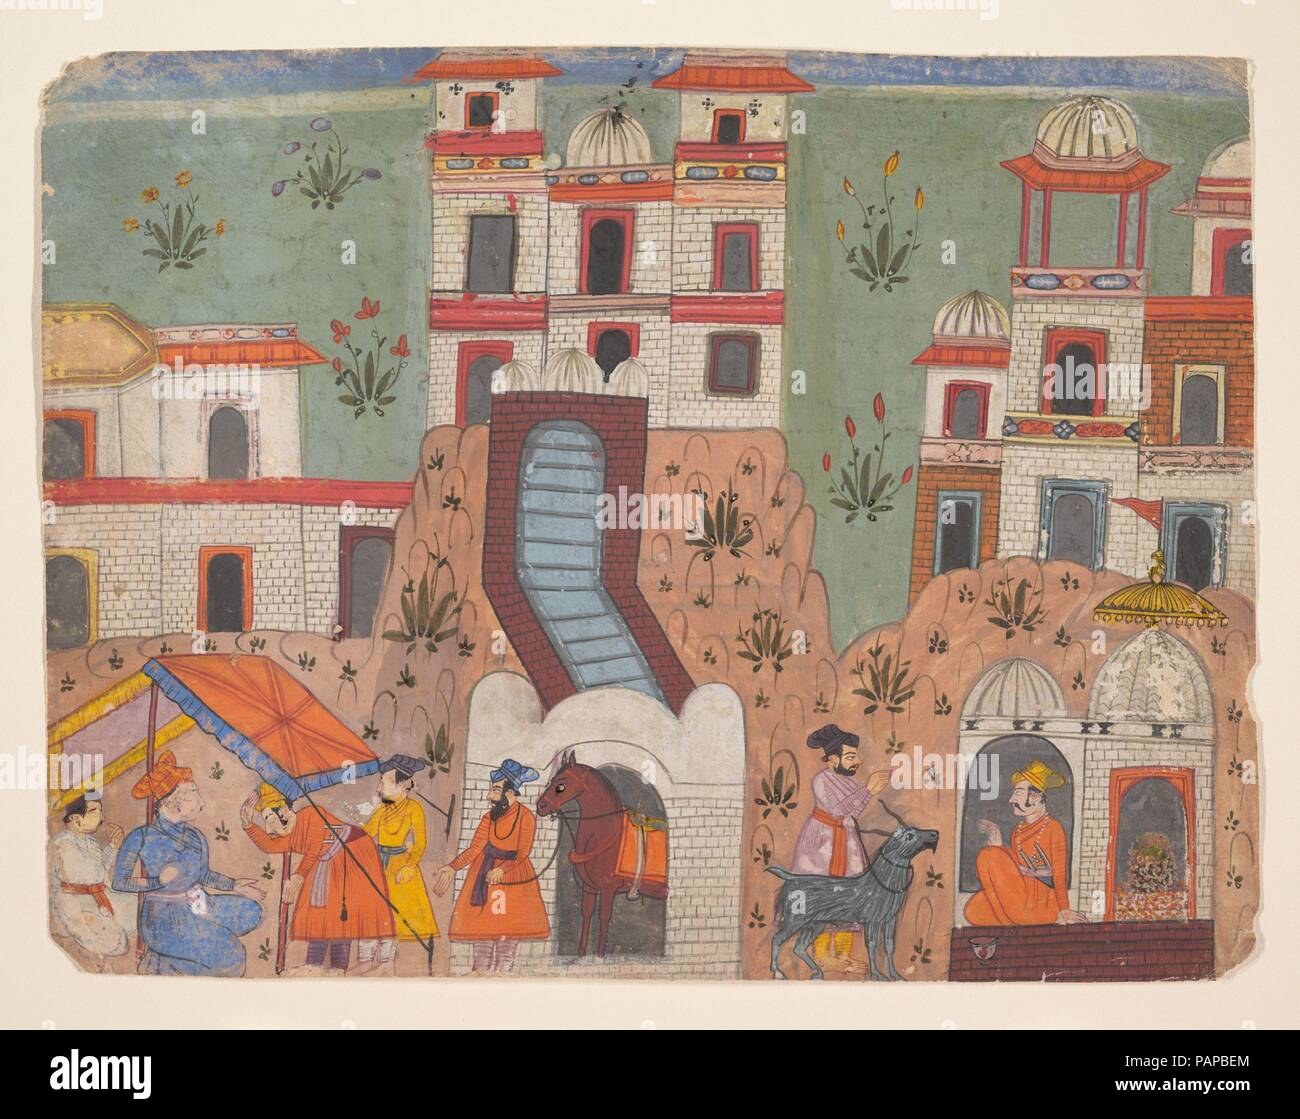 A Raja Receives Homage Outside the City: Page from a Dispersed Manuscript. Culture: India (Punjab Hills, Bilaspur). Dimensions: 8 7/8 x 11 1/2 in. (22.5 x 29.2 cm). Date: last quarter of the 17th century.  This page from an unidentified Hindu chronicle of a king depicts a mountain city with typical multistoried hill architecture atop abstract mounds strewn with clumps of flowers. Outside the gates on the right is a Saivite shrine with a lingum covered by floral offerings to which a goat is led, probably for sacrifice. At the left, courtiers pay their respects to the king under a pavilion. The  Stock Photo